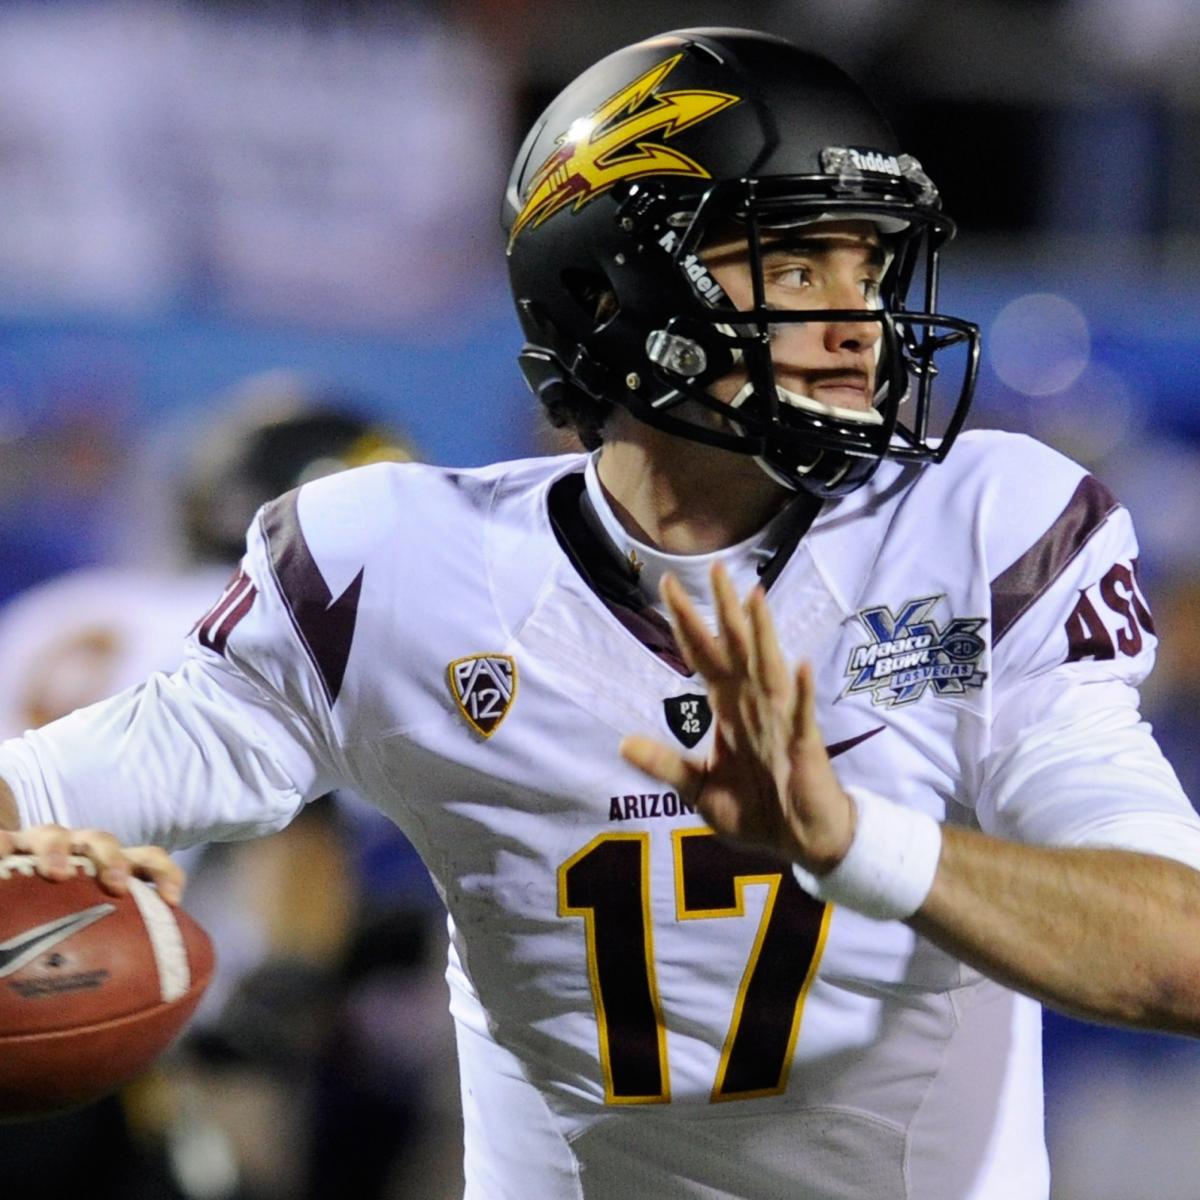 NFL Draft Combine 2012 Results: Height Improves Brock Osweiler's Draft ...